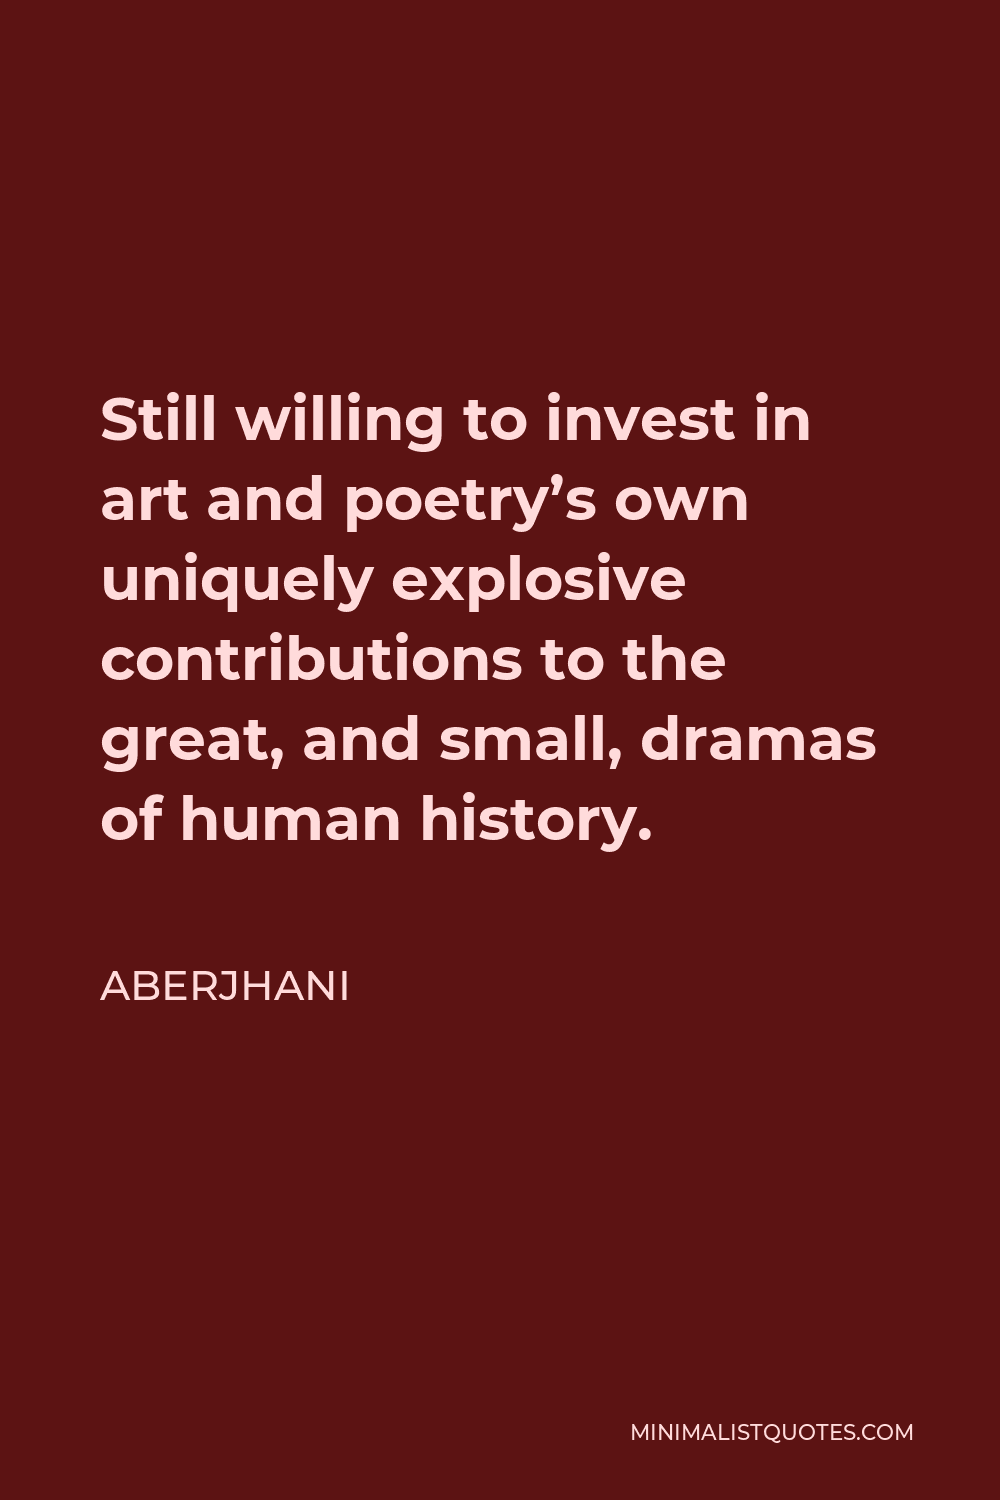 Aberjhani Quote - Still willing to invest in art and poetry’s own uniquely explosive contributions to the great, and small, dramas of human history.